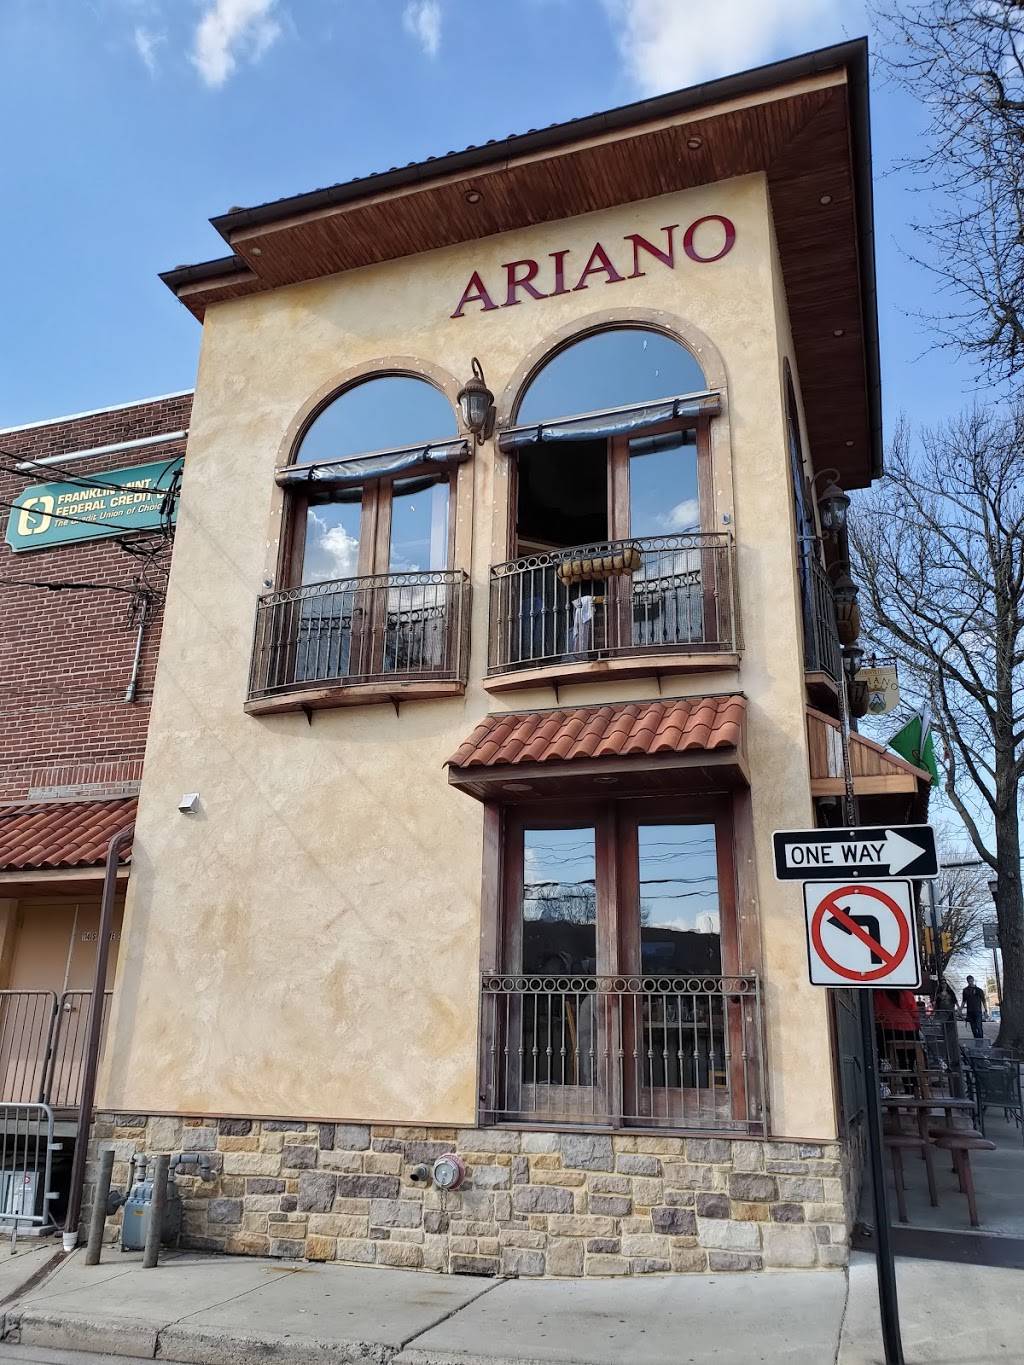 Ariano | restaurant | 114 S Olive St, Media, PA 19063, USA | 6108926944 OR +1 610-892-6944